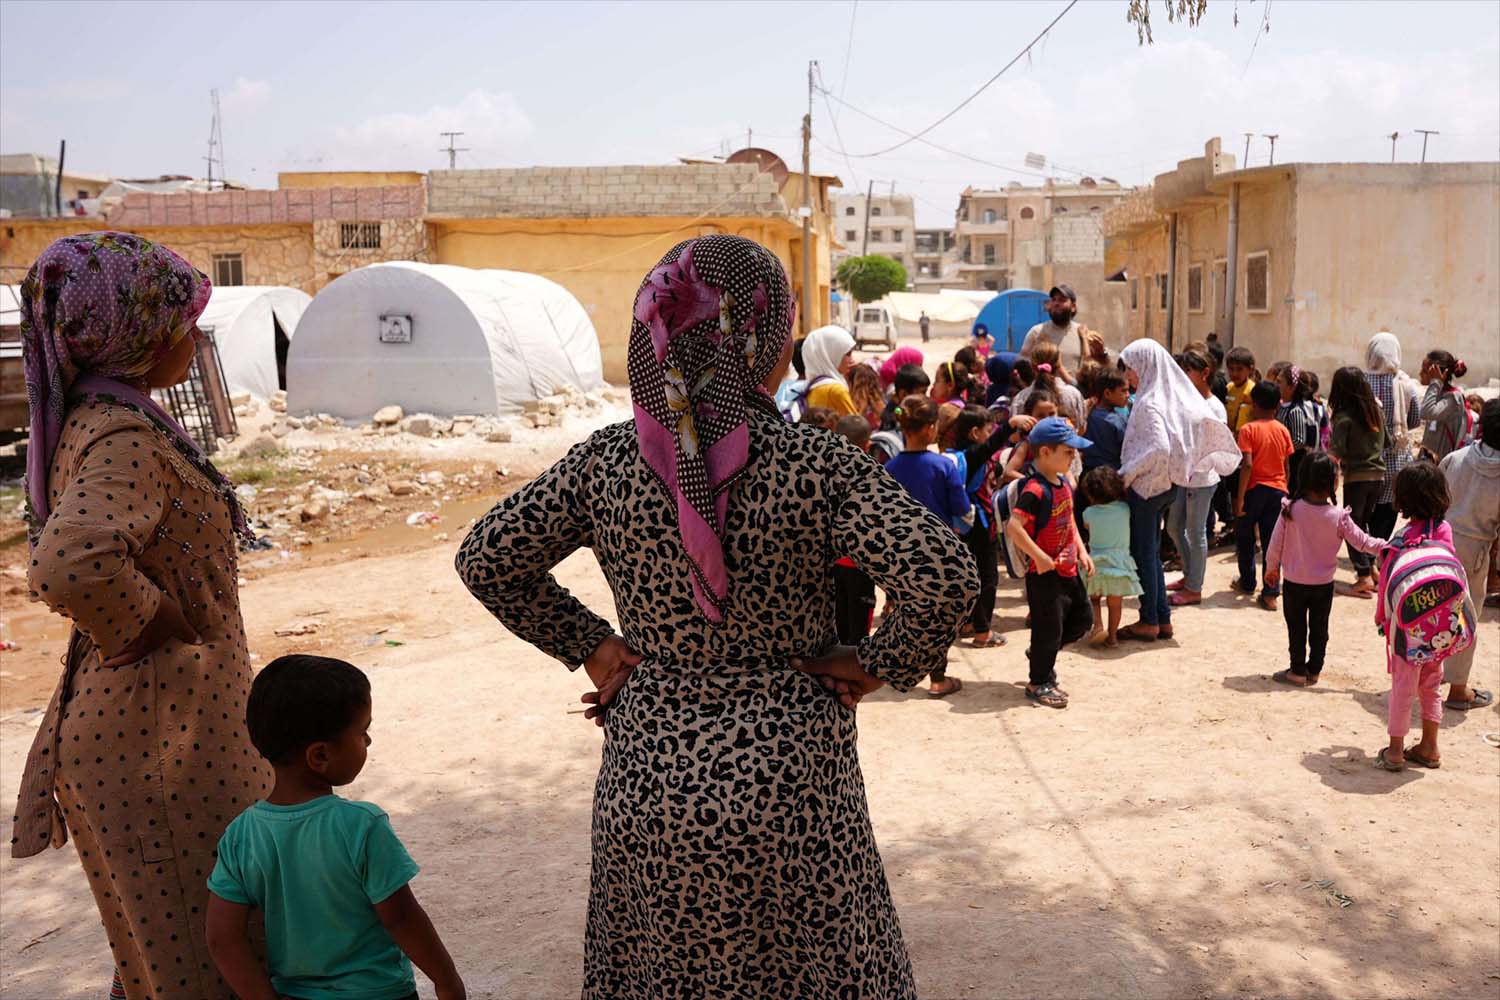 About 5.5 million Syrian refugees live in Turkey, Lebanon, Jordan and Iraq as well as Egypt